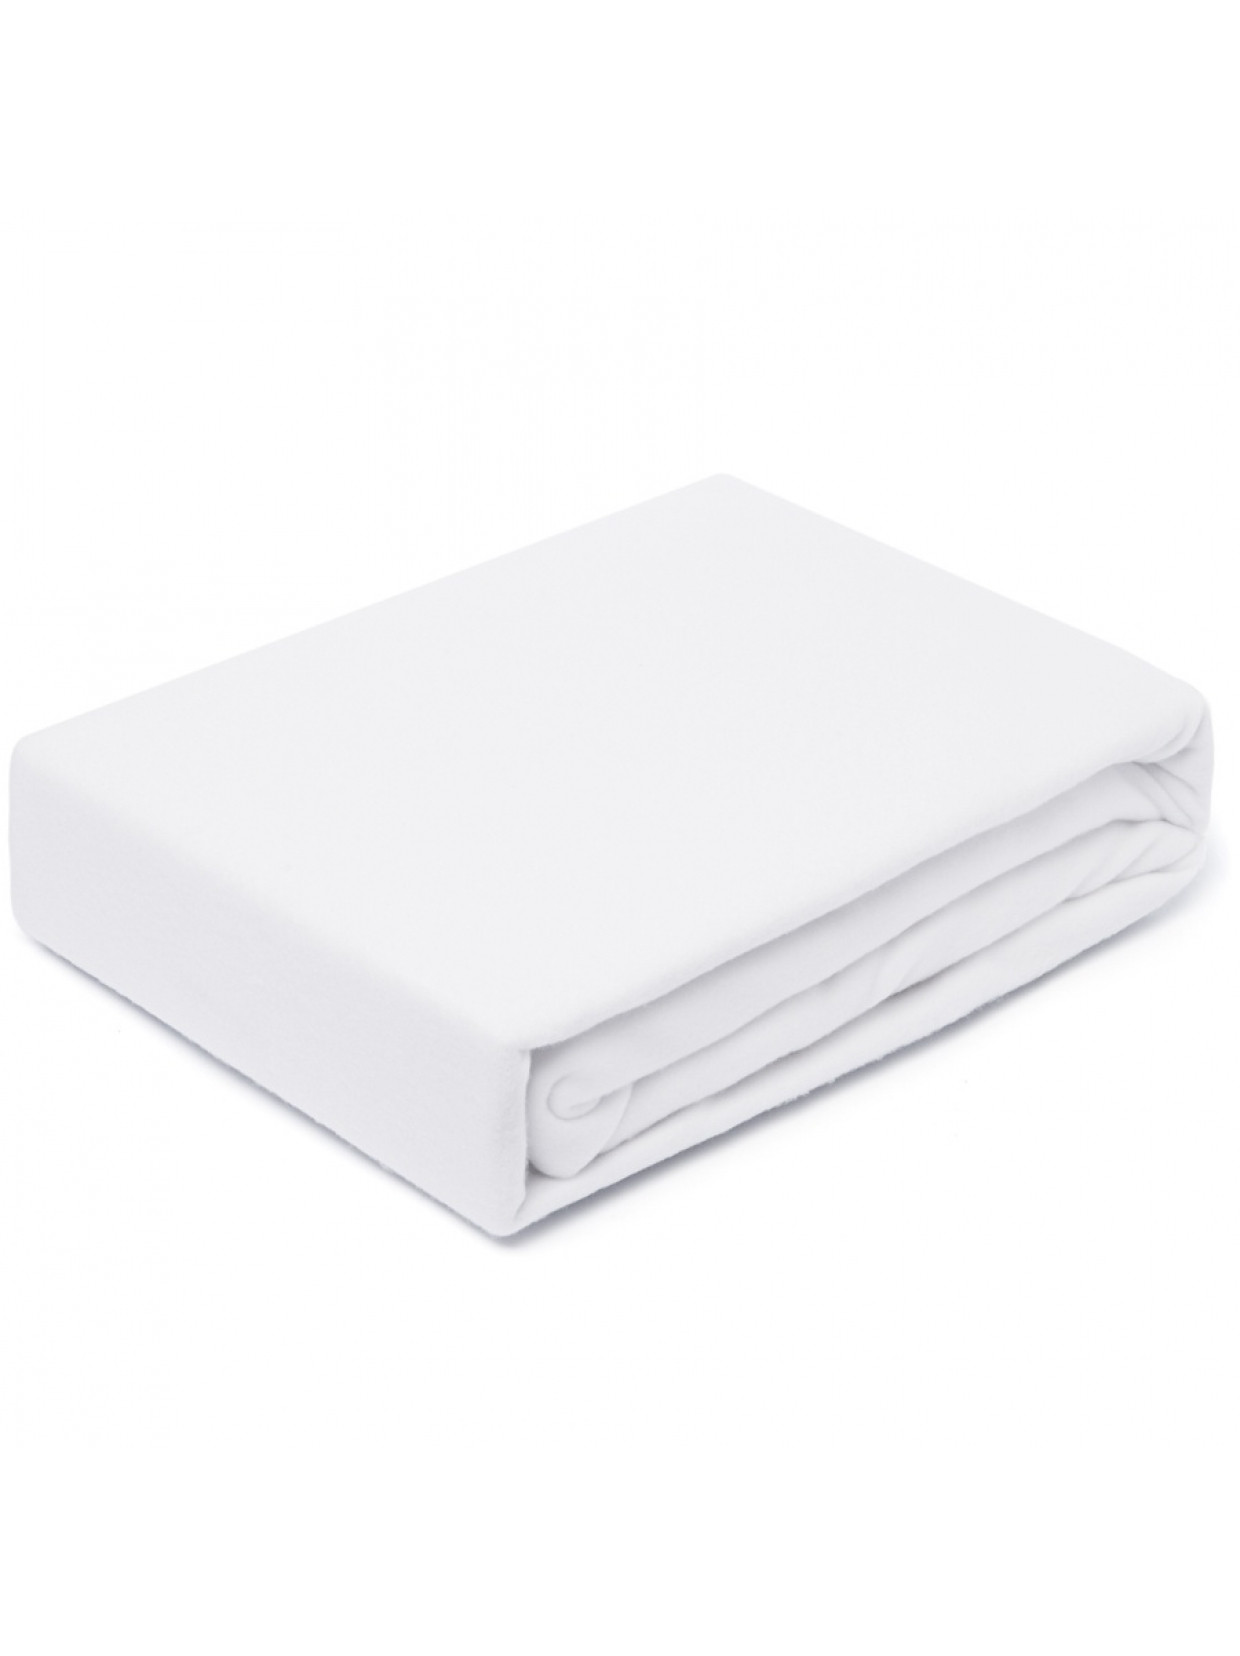 Rent a Fitted sheet 1 person 160x200? Rent at KeyPro furniture rental!